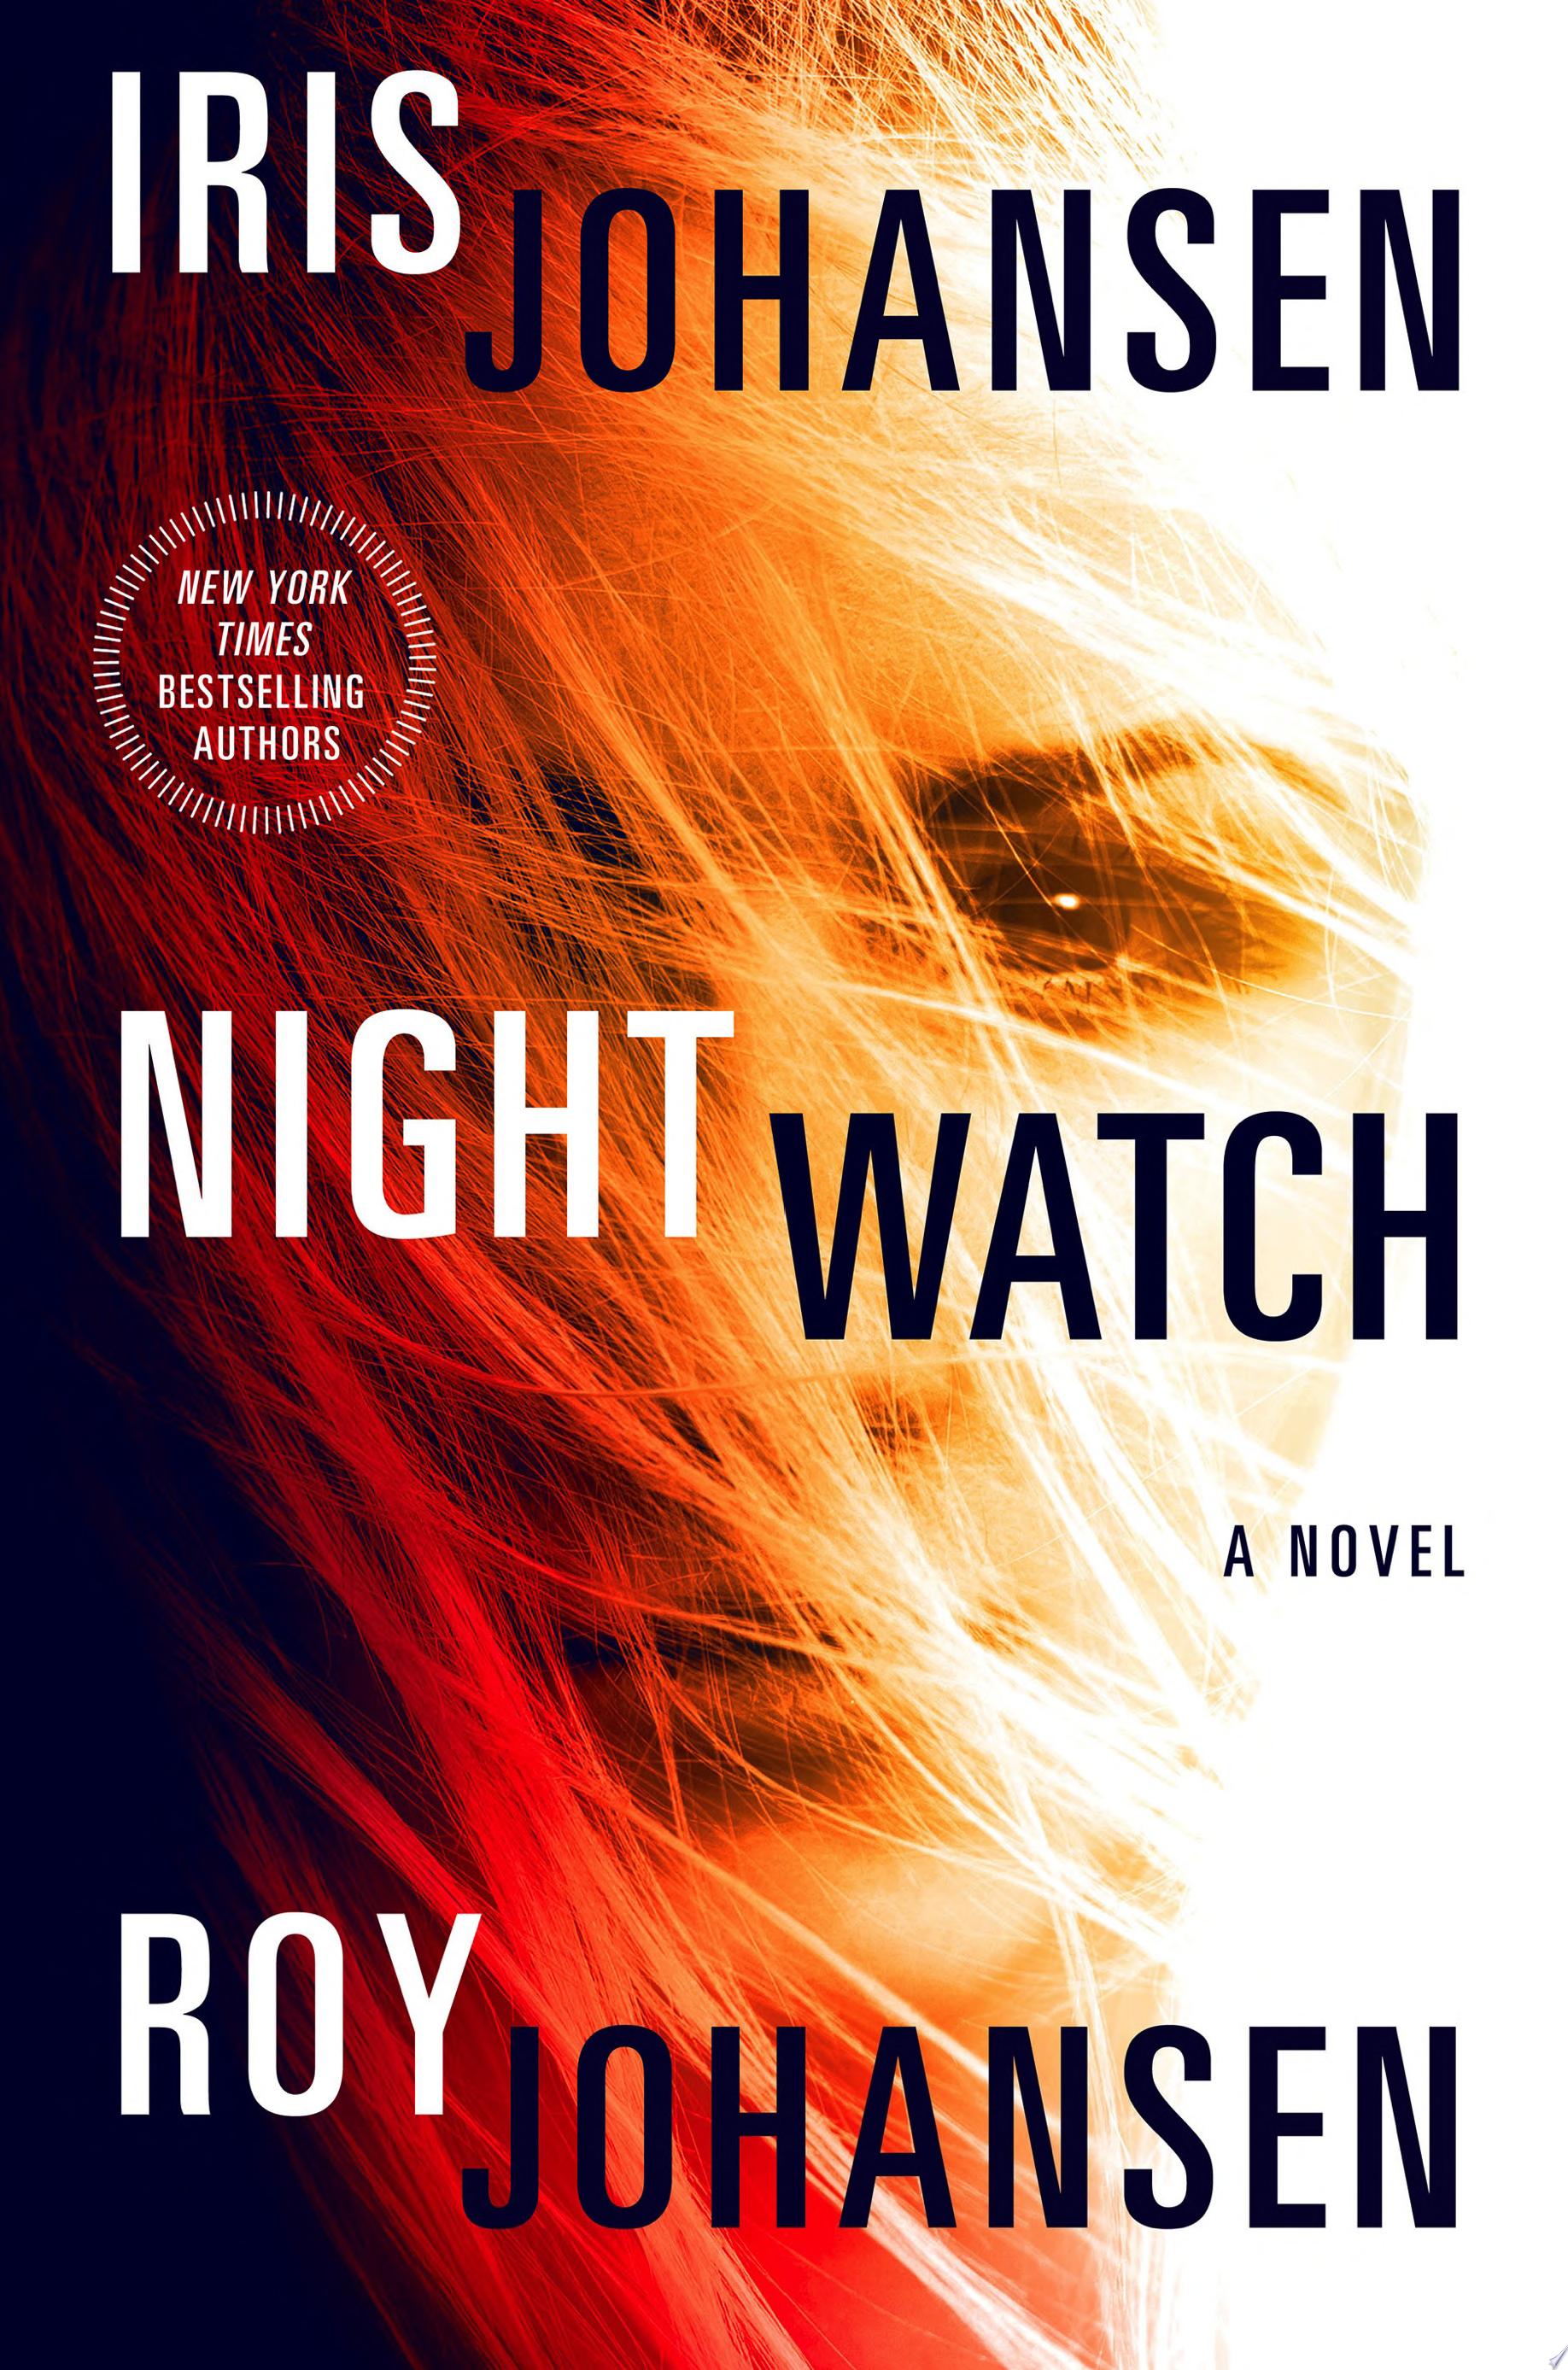 Image for "Night Watch"